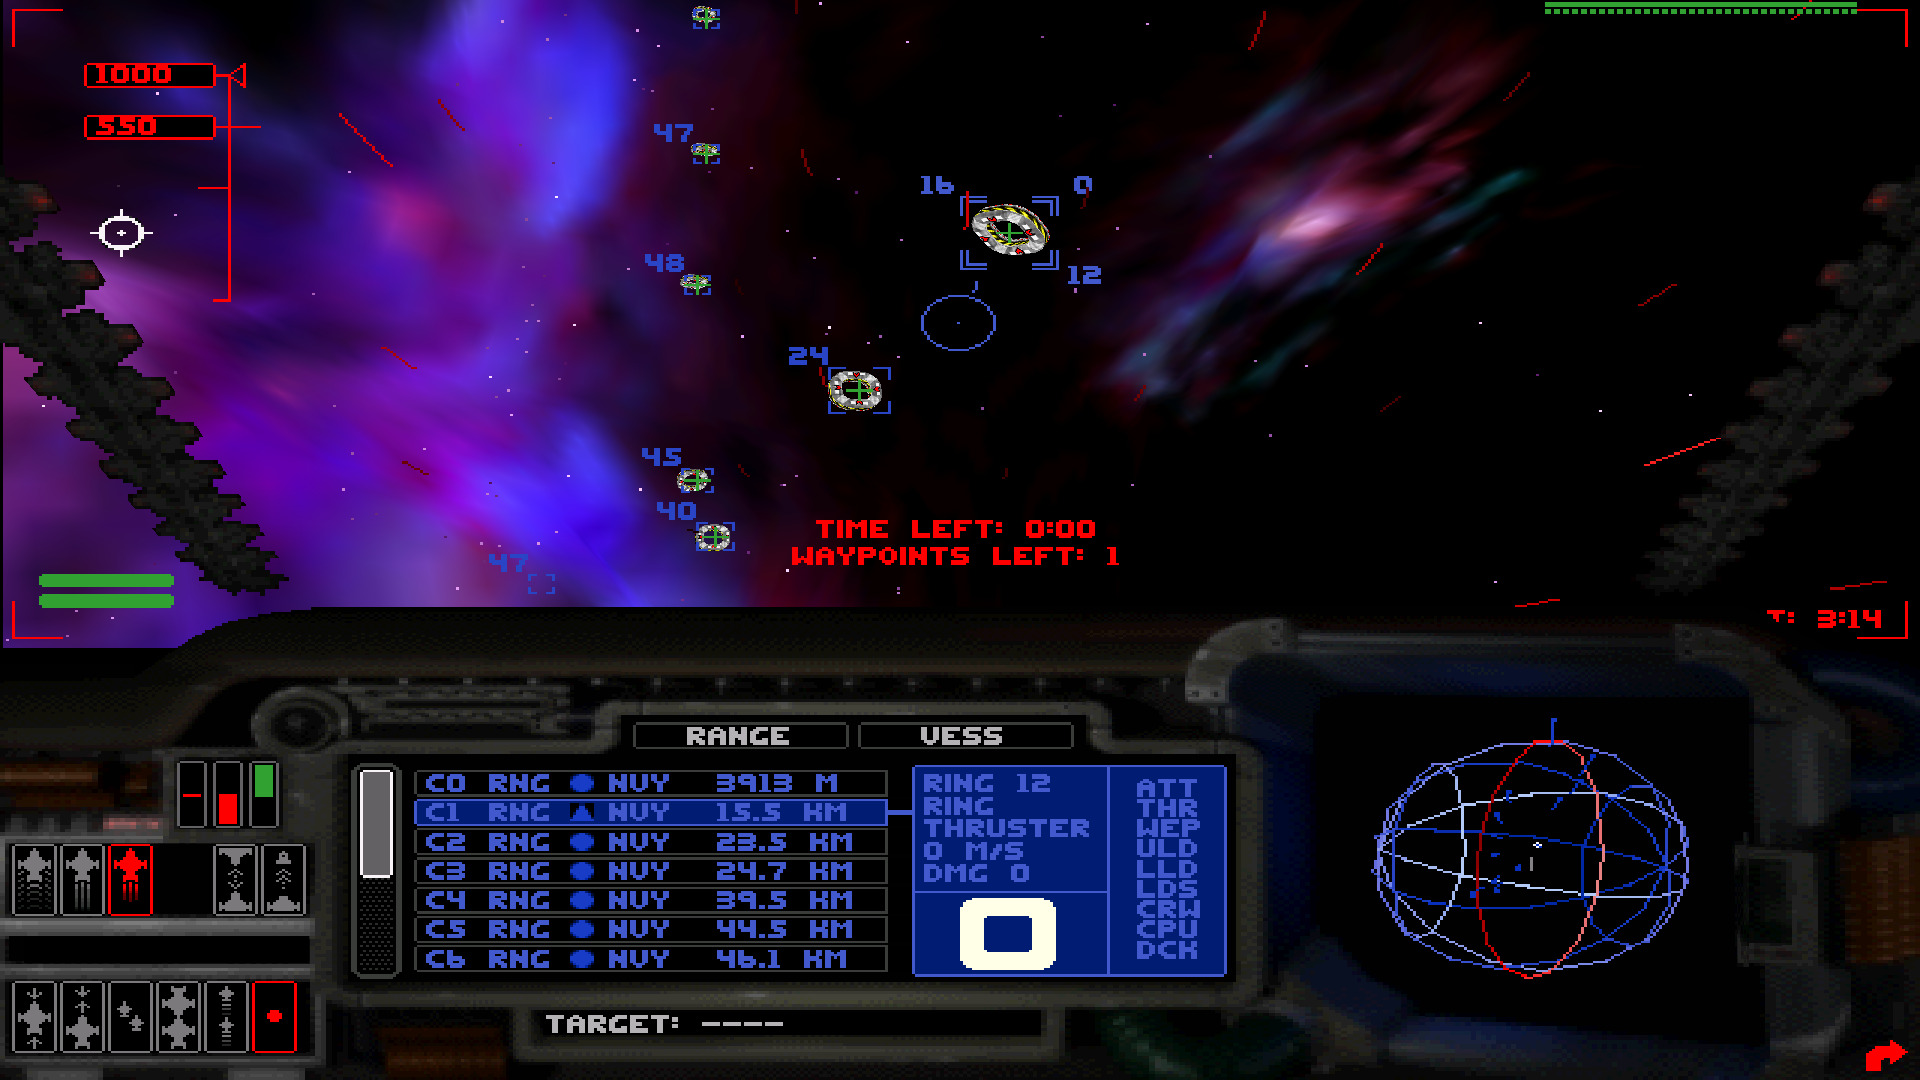 i-War Defiance: (1997) how to setup (windows 7 and windows 10) with 3D acceleration – a old but genious scifi space ship simulator with real mass drifting inertia – how to switch to 3rd person “ship” external view